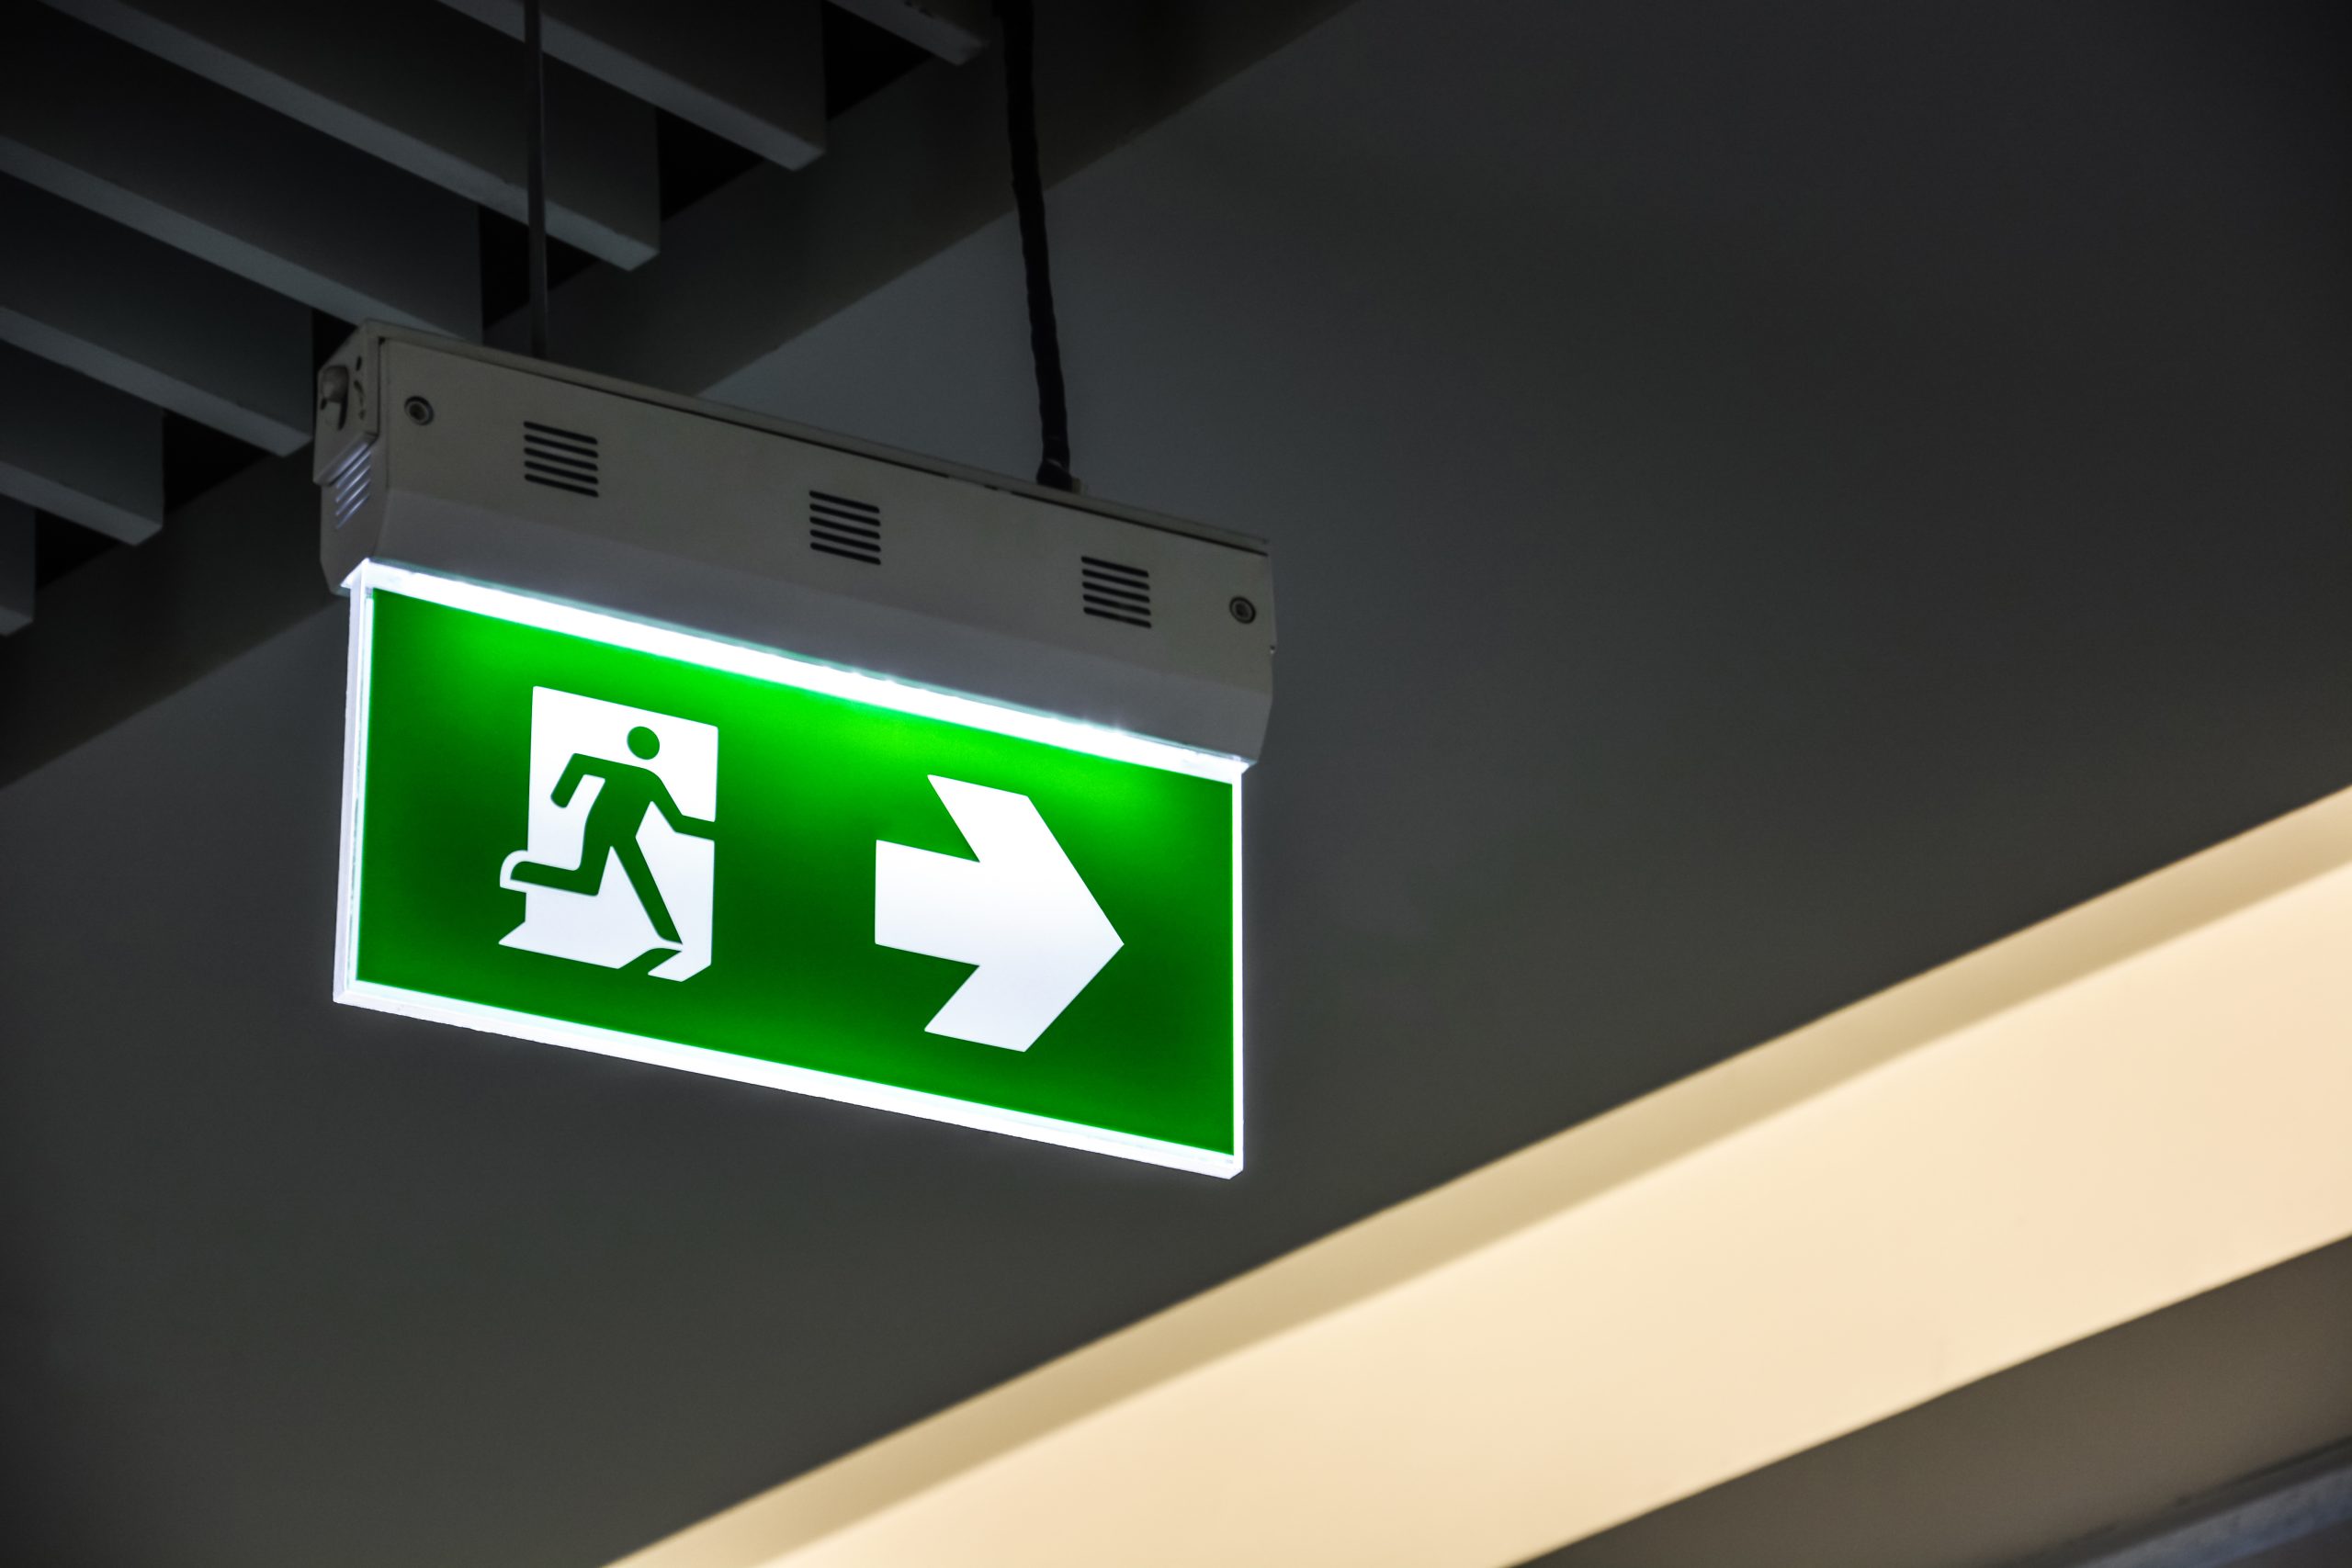 FAQ - afp - How often should emergency lighting be maintained?